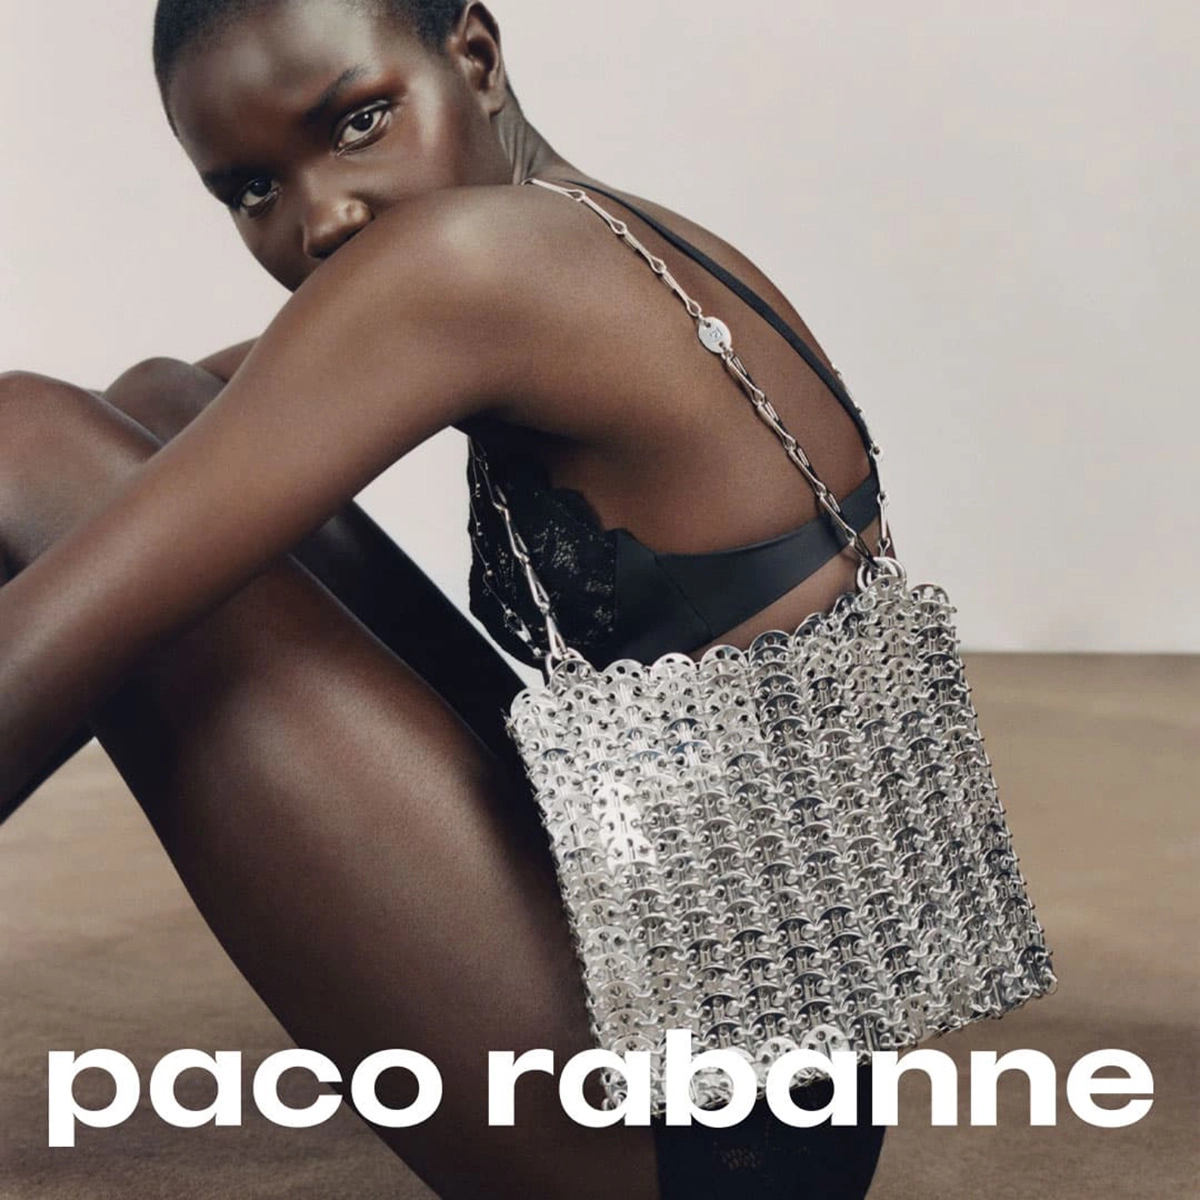 Paco Rabanne Fall Winter 2022 Campaign